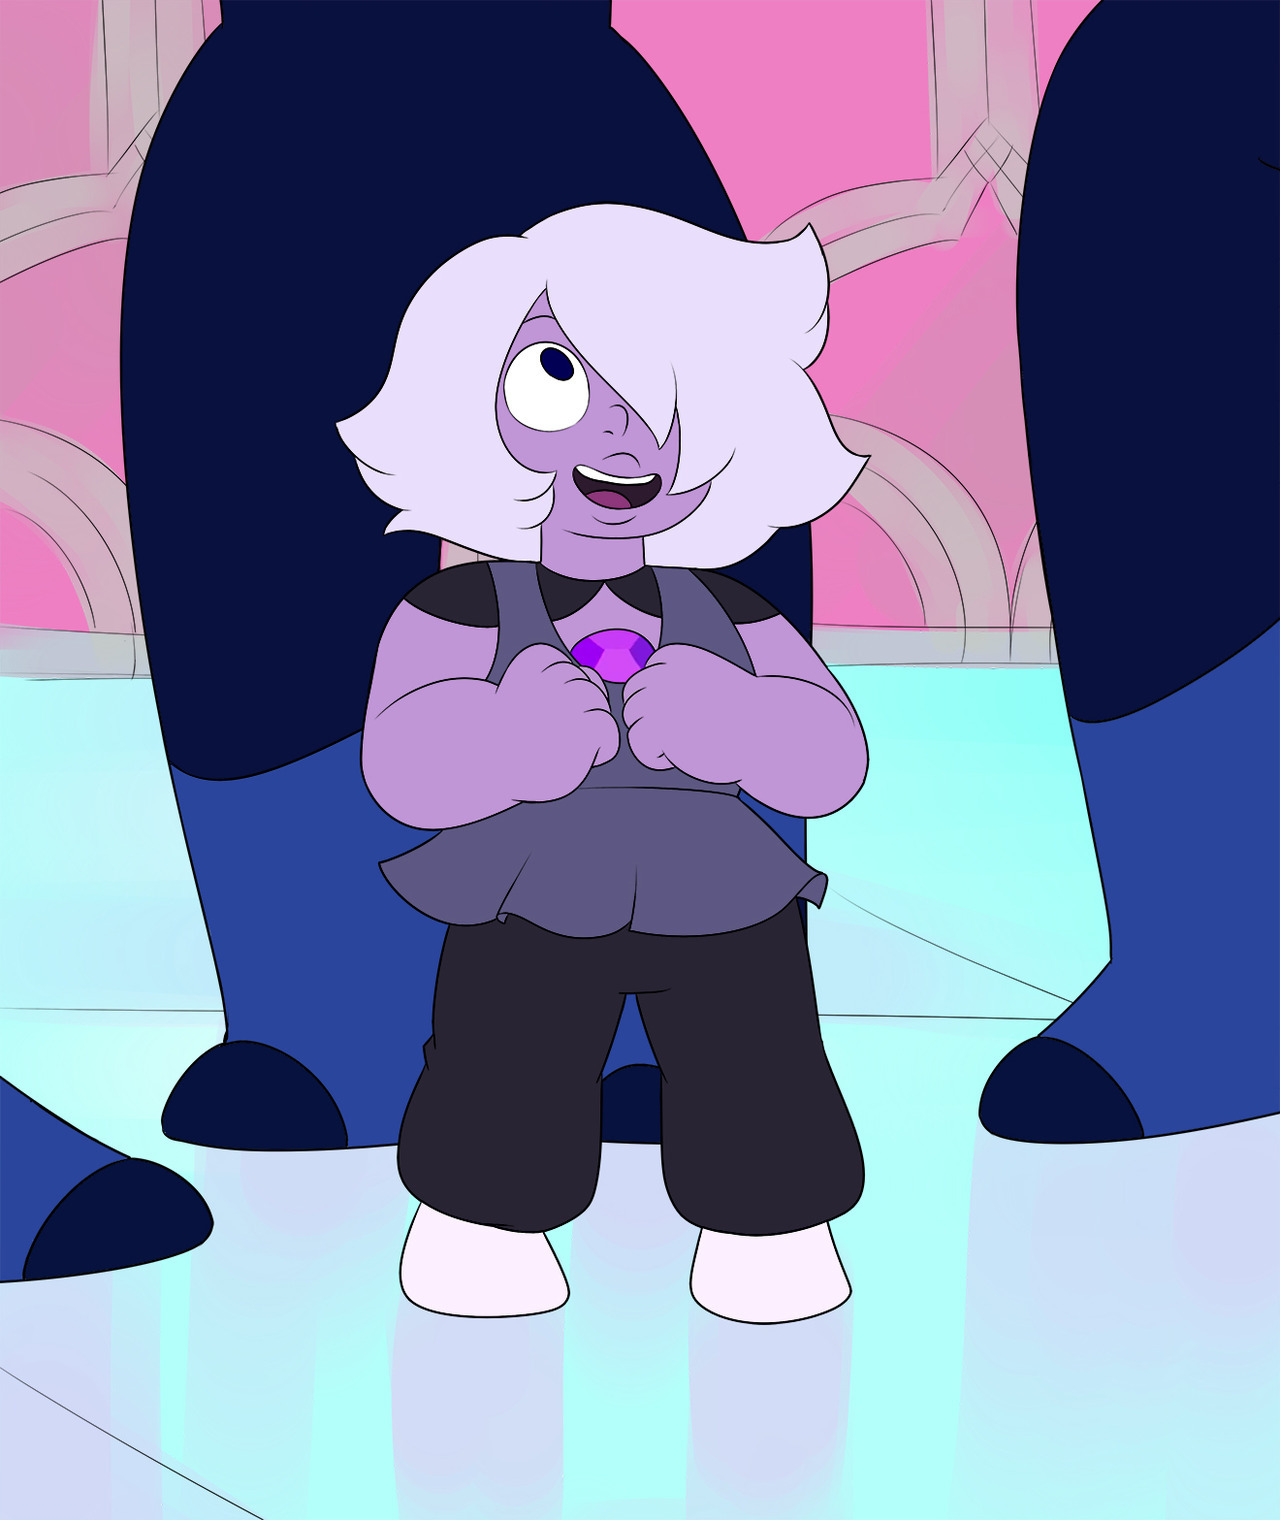 I still think if Amethyst was found and raised by the Famethyst instead of the Crystal Gems, adorable shenanigans would’ve been had by all. As a side note, the working file’s name was “amekitten” and...